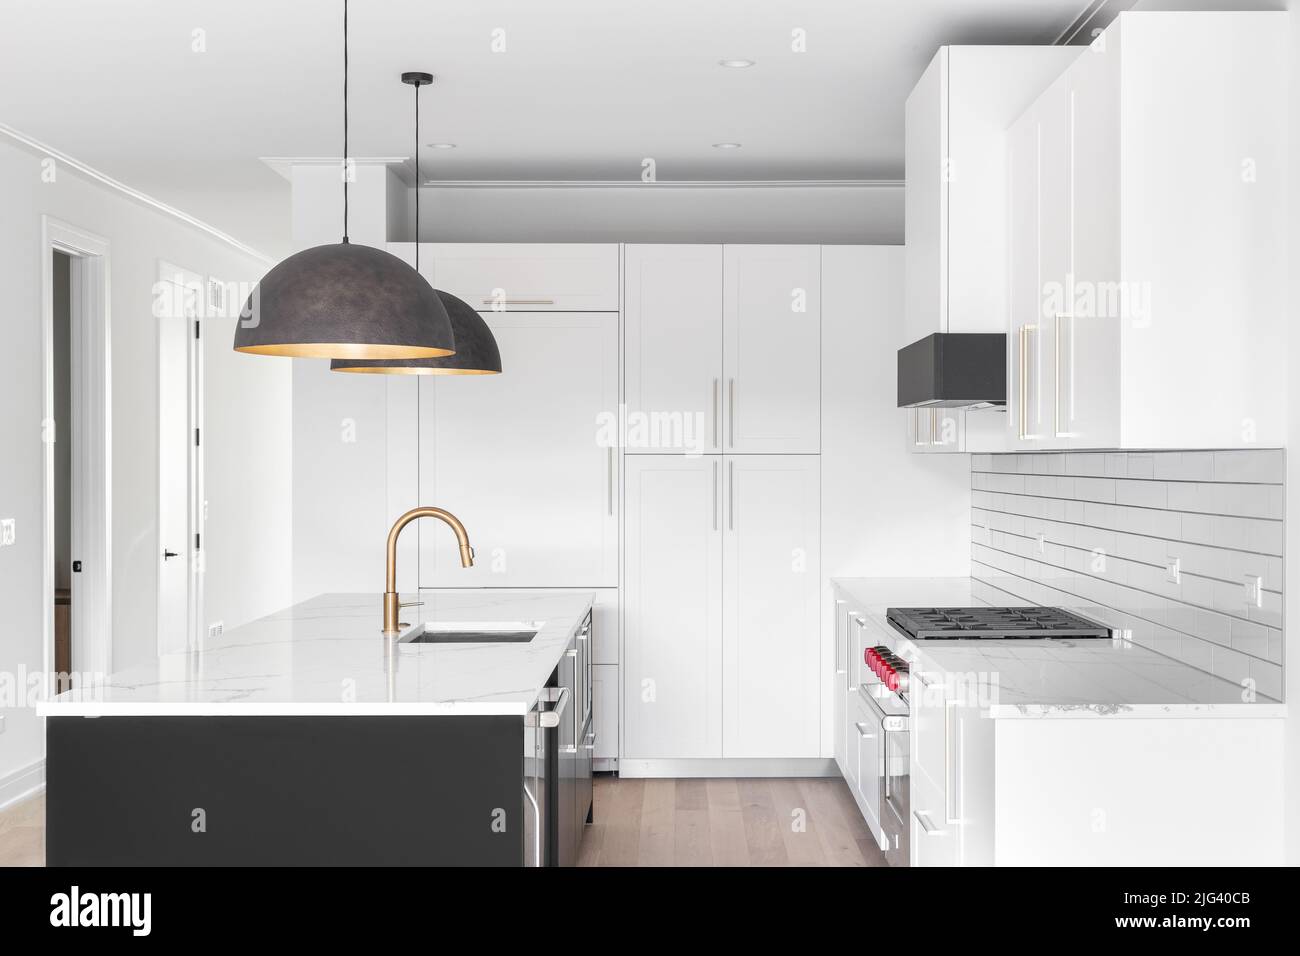 A beautiful, modern kitchen with white cabinets, large pendant lights above a black island, subway tile backsplash, and white marble countertop. Stock Photo